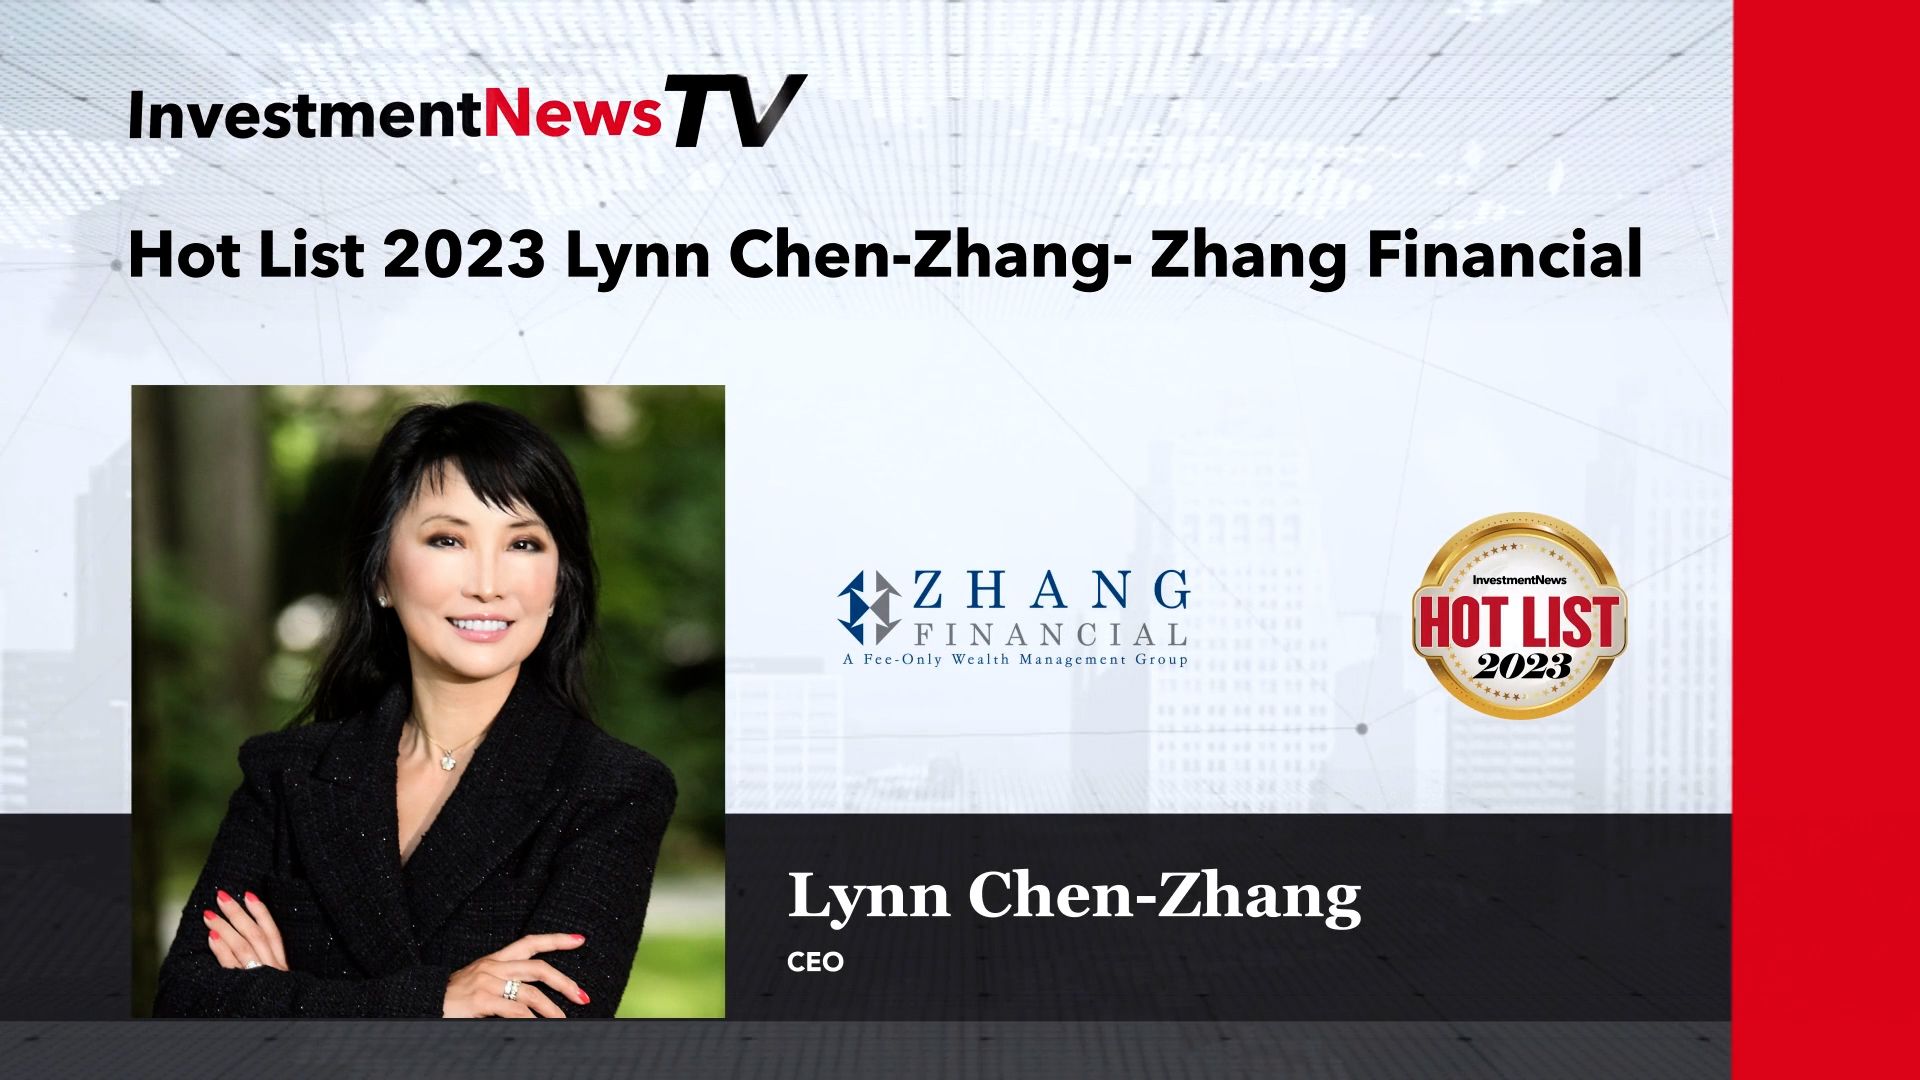 Trust at the heart of Zhang Financial’s success